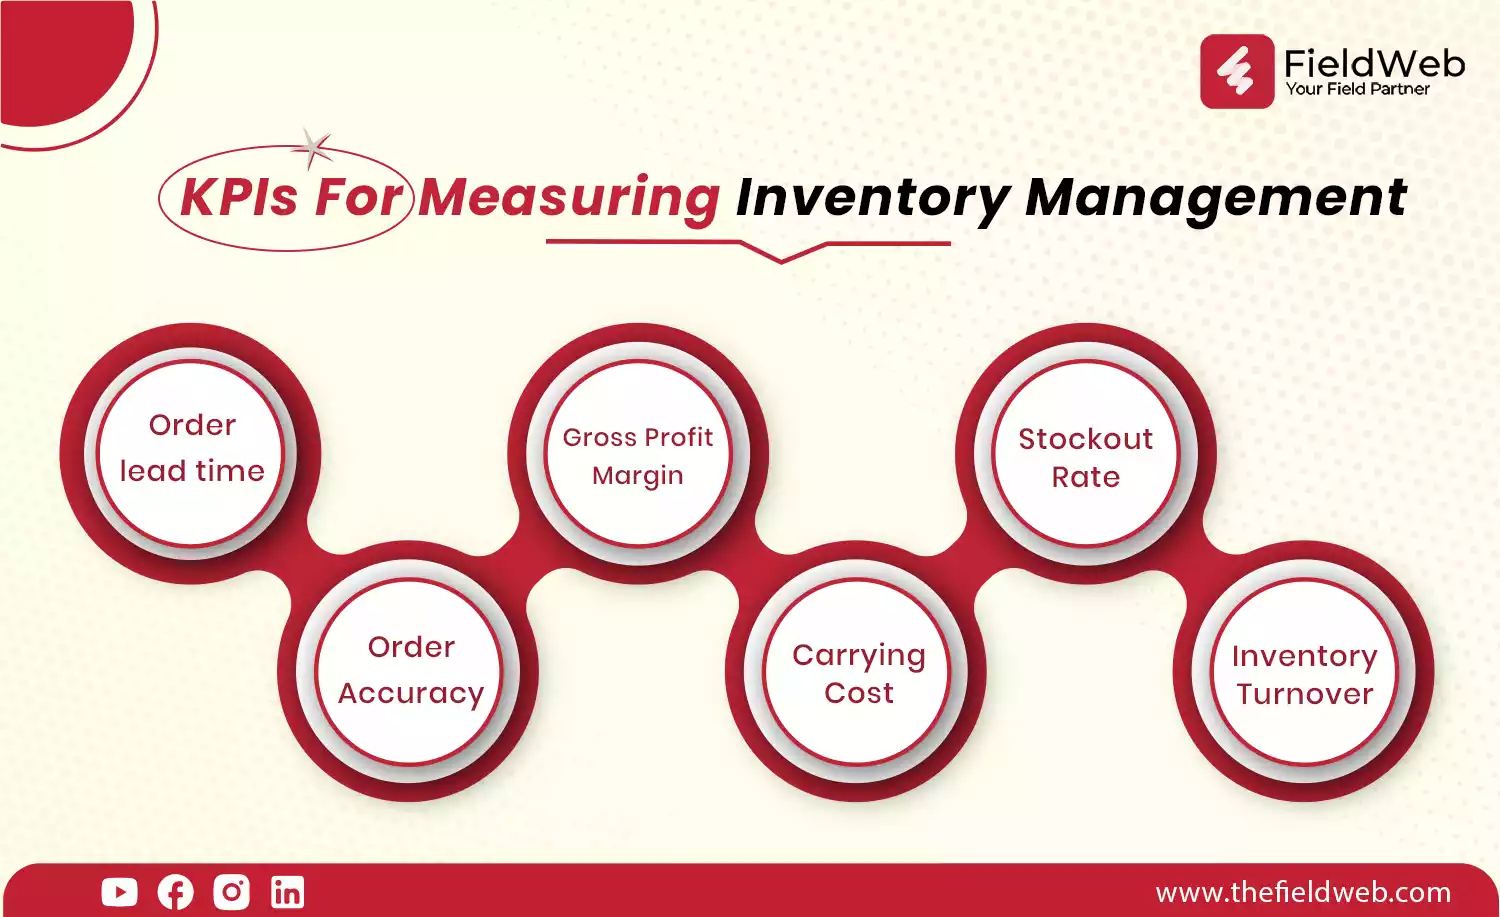 image is displaying 6 KPIs of inventory management in field service businesses